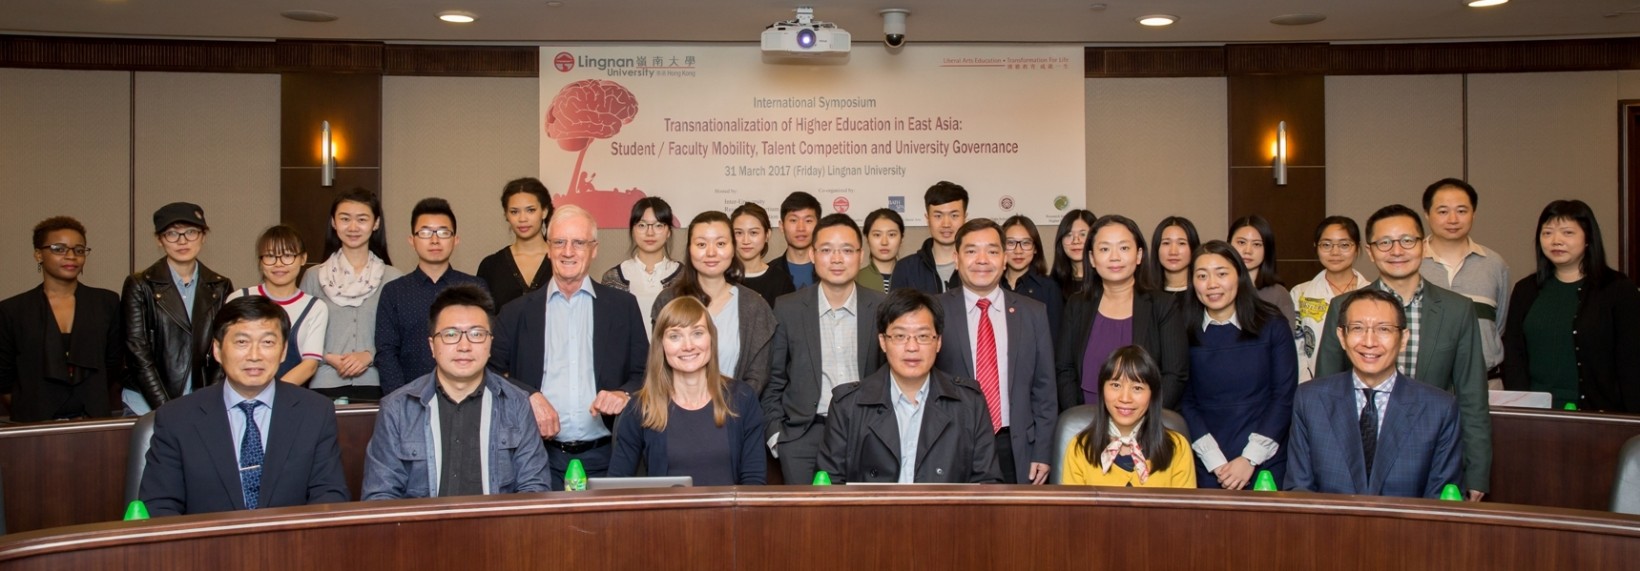 International Symposium on Transnationalisation of Higher Education in East Asia